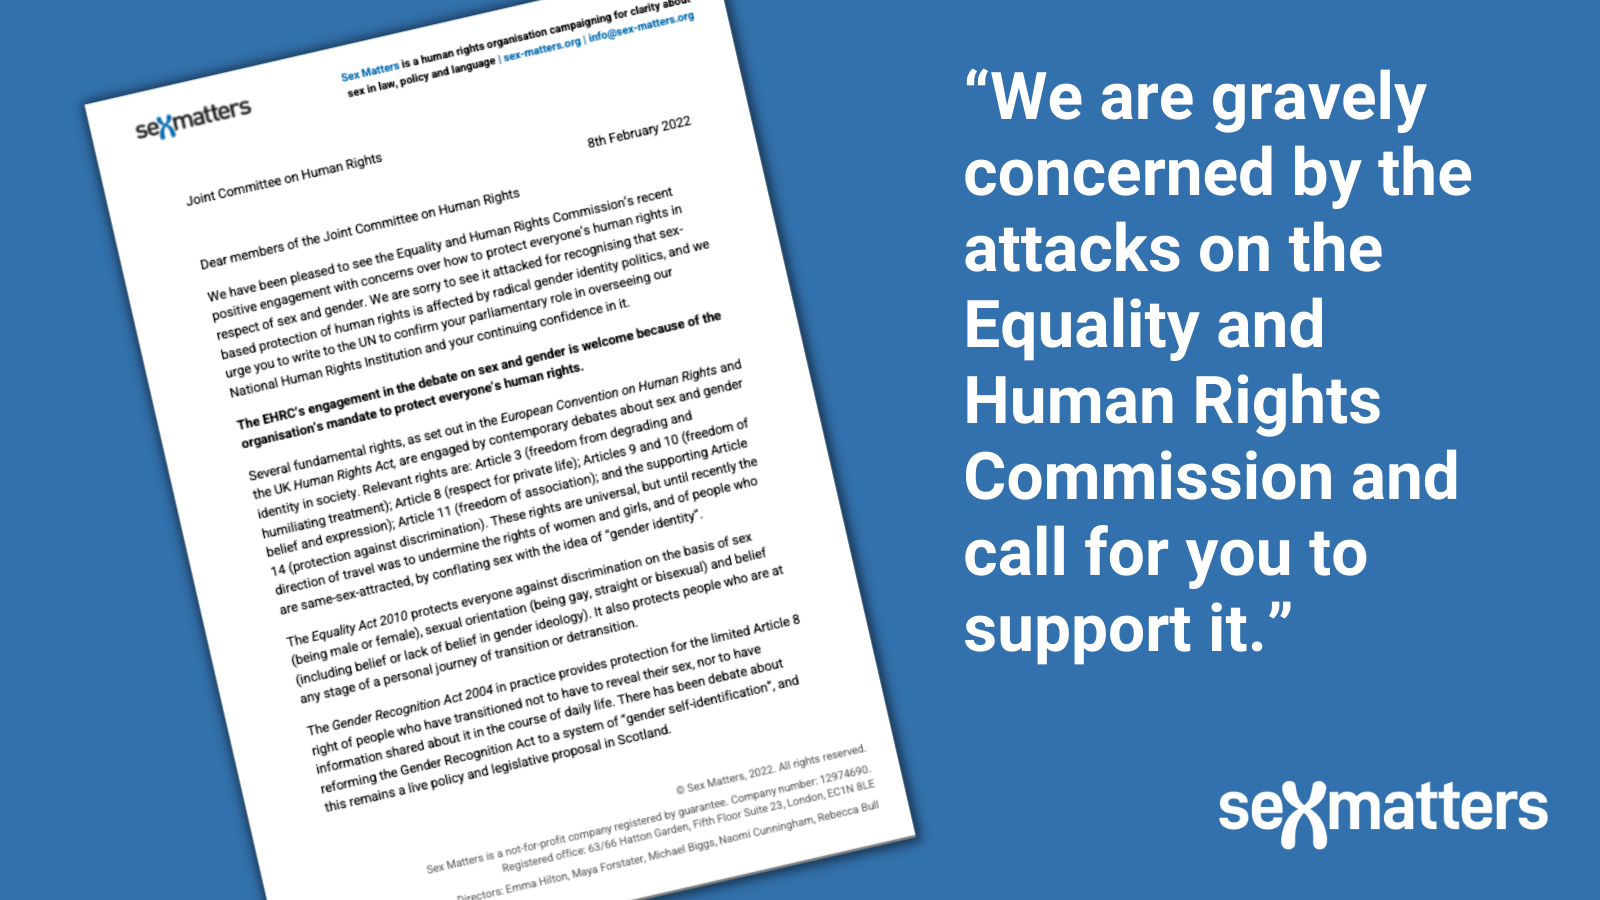 “We are gravely concerned by the attacks on the Equality and Human Rights Commission and call for you to support it.”